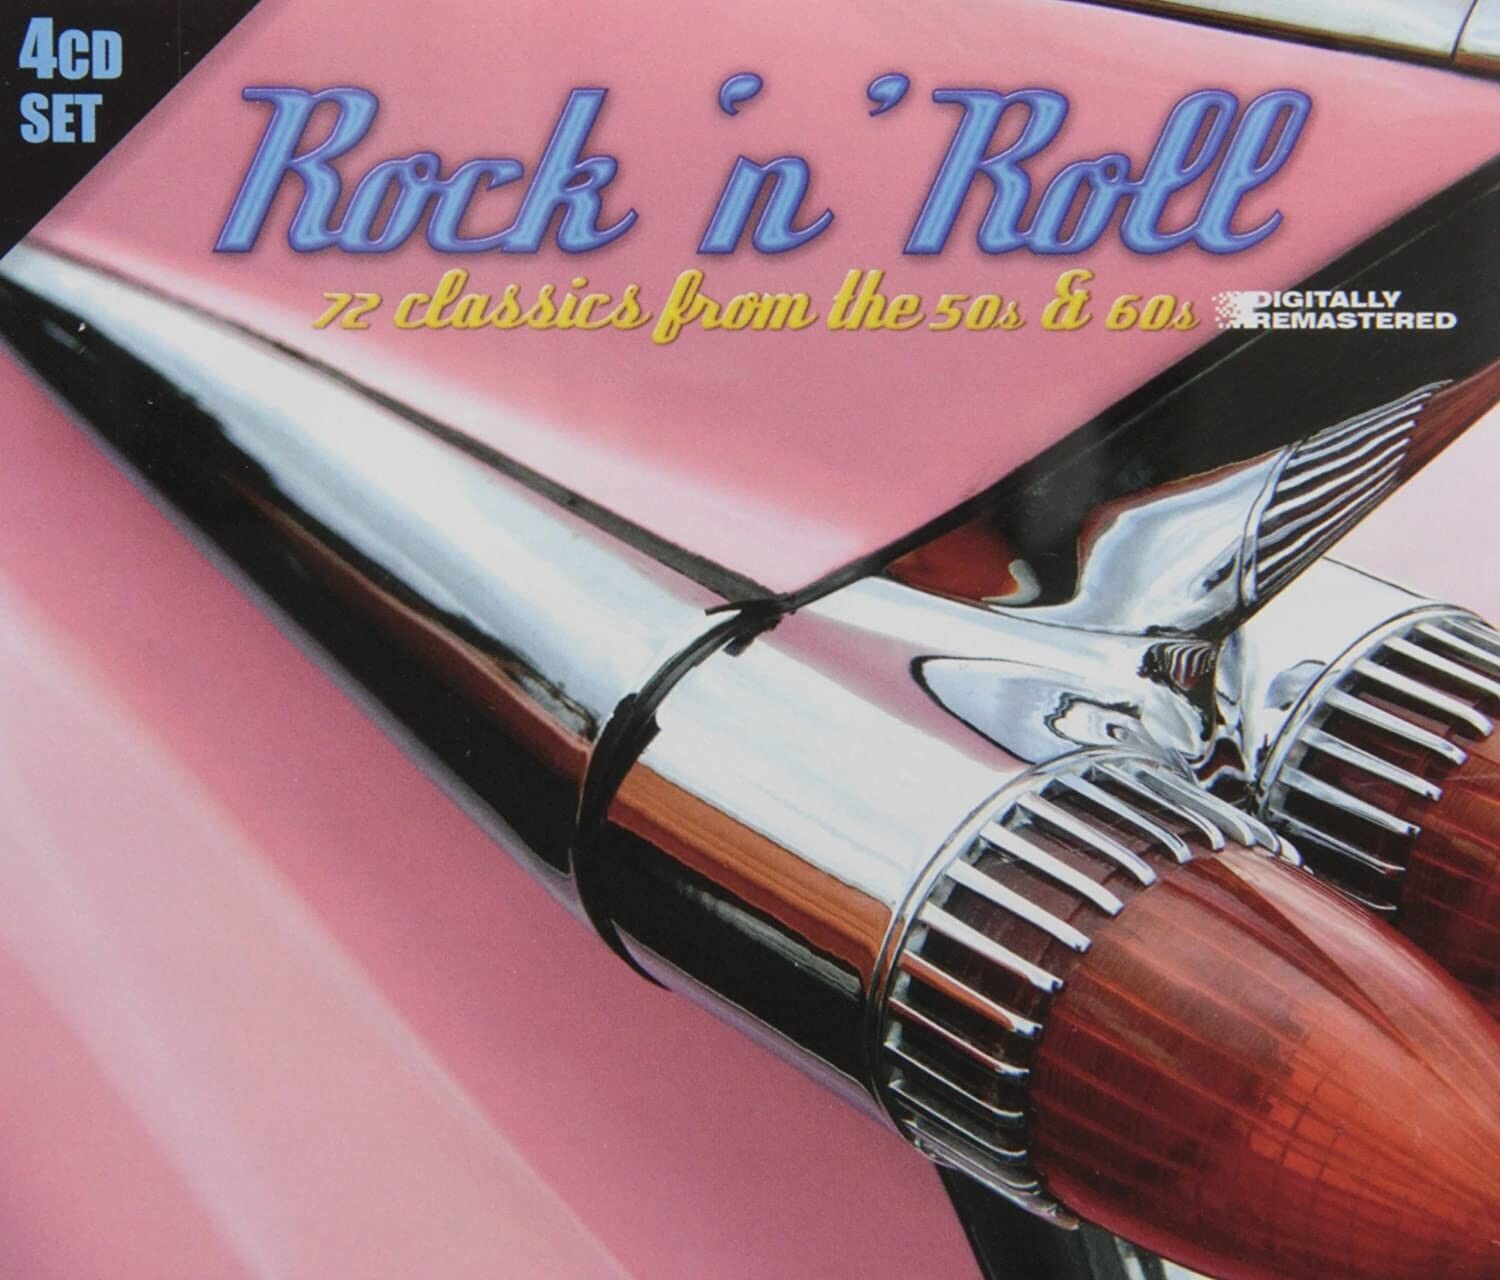 Rock 'n' Roll: 72 Classics From The 50s & 60s (4 CD Set)